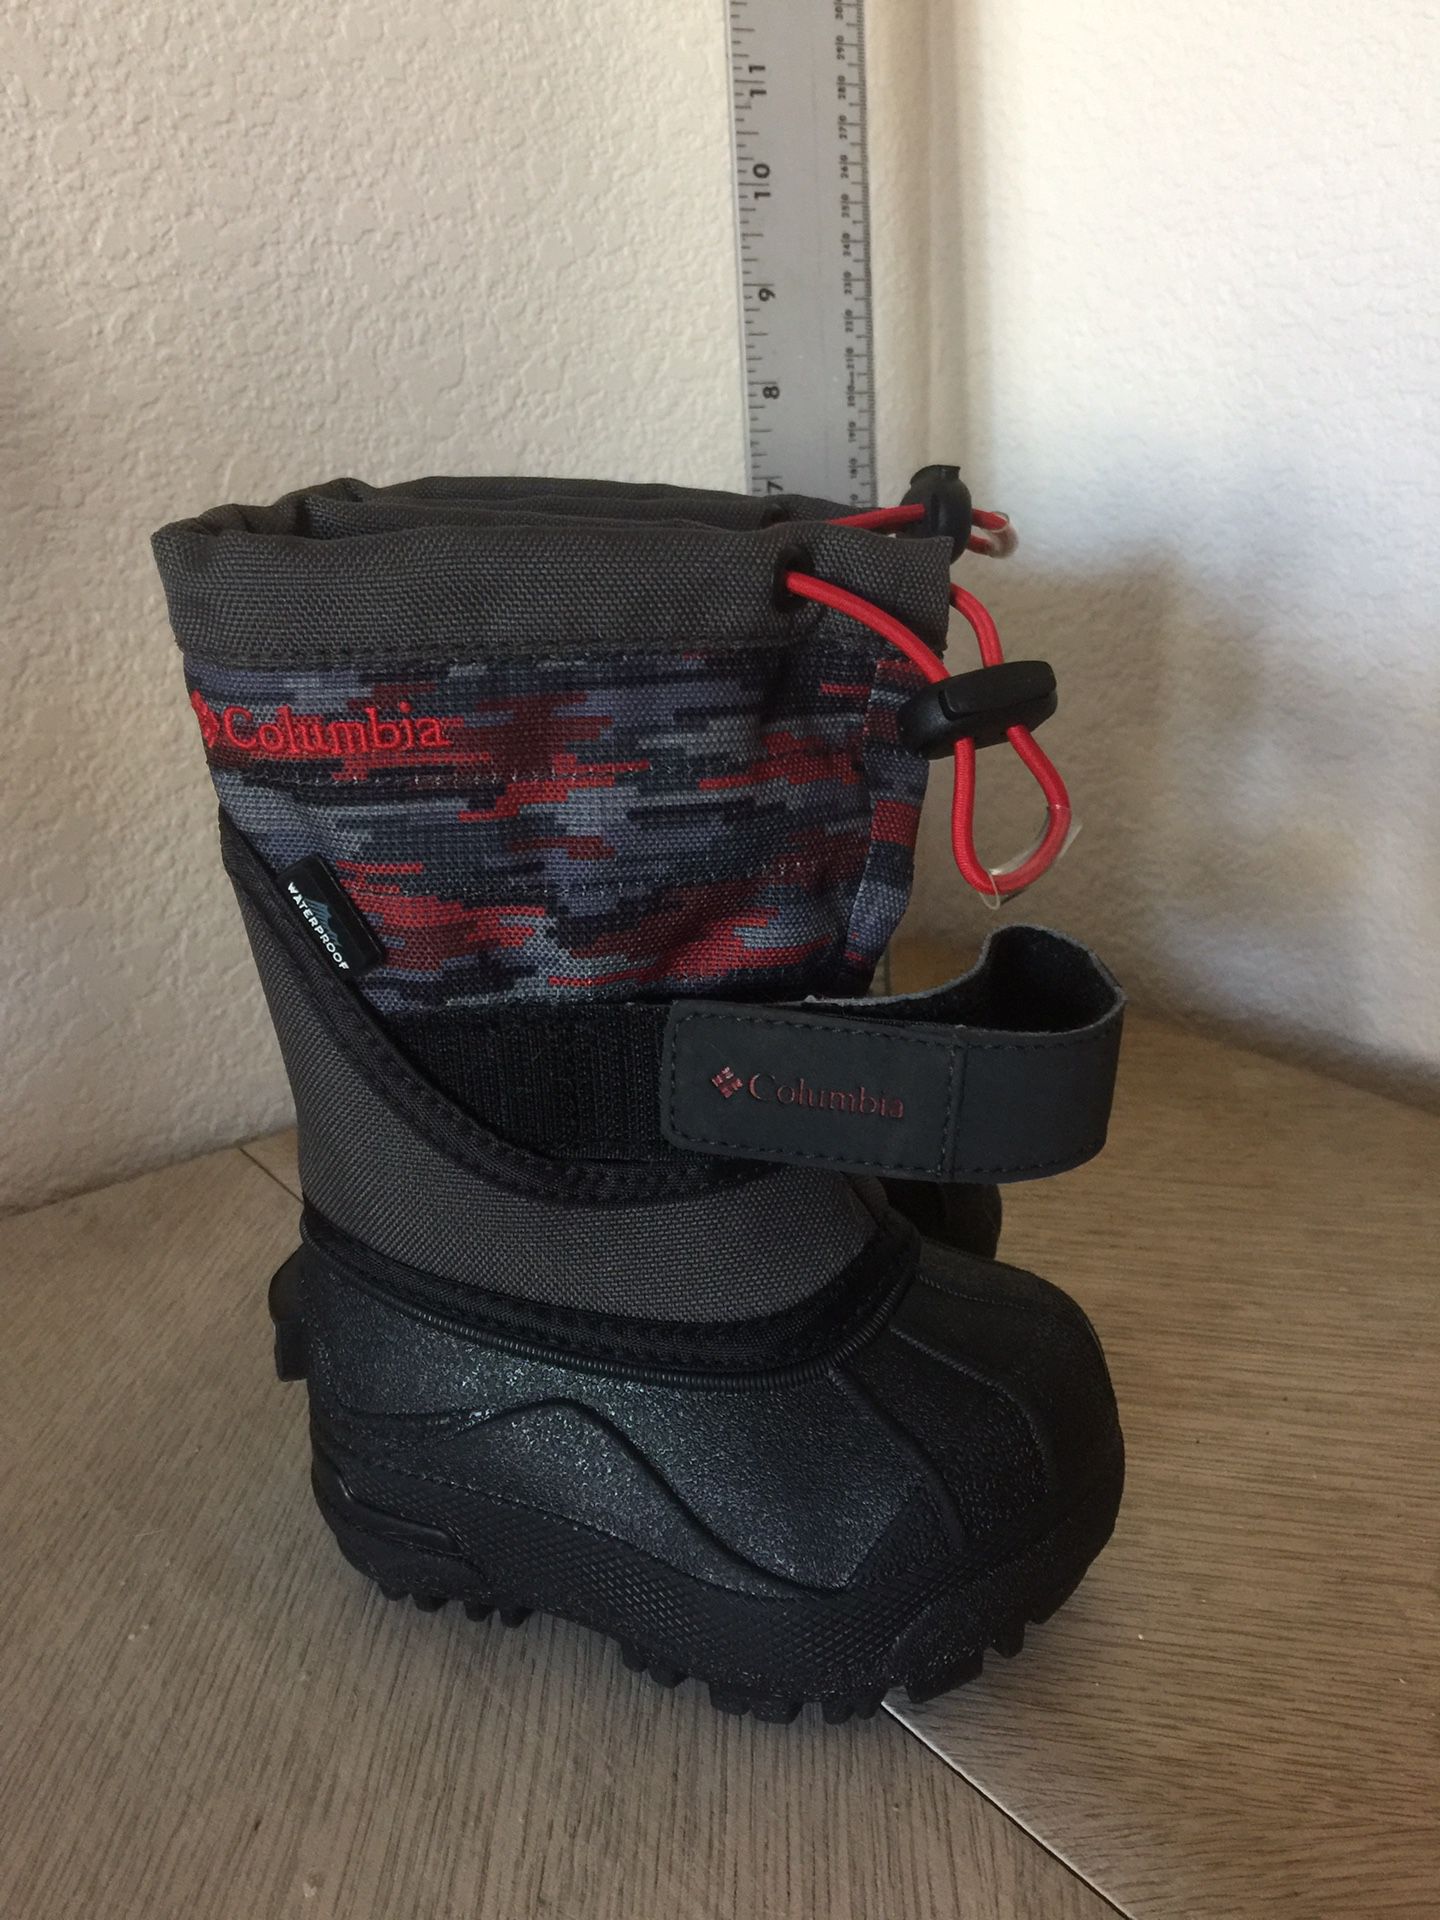 NEW TODDLER SIZE 4 Columbia winter boots